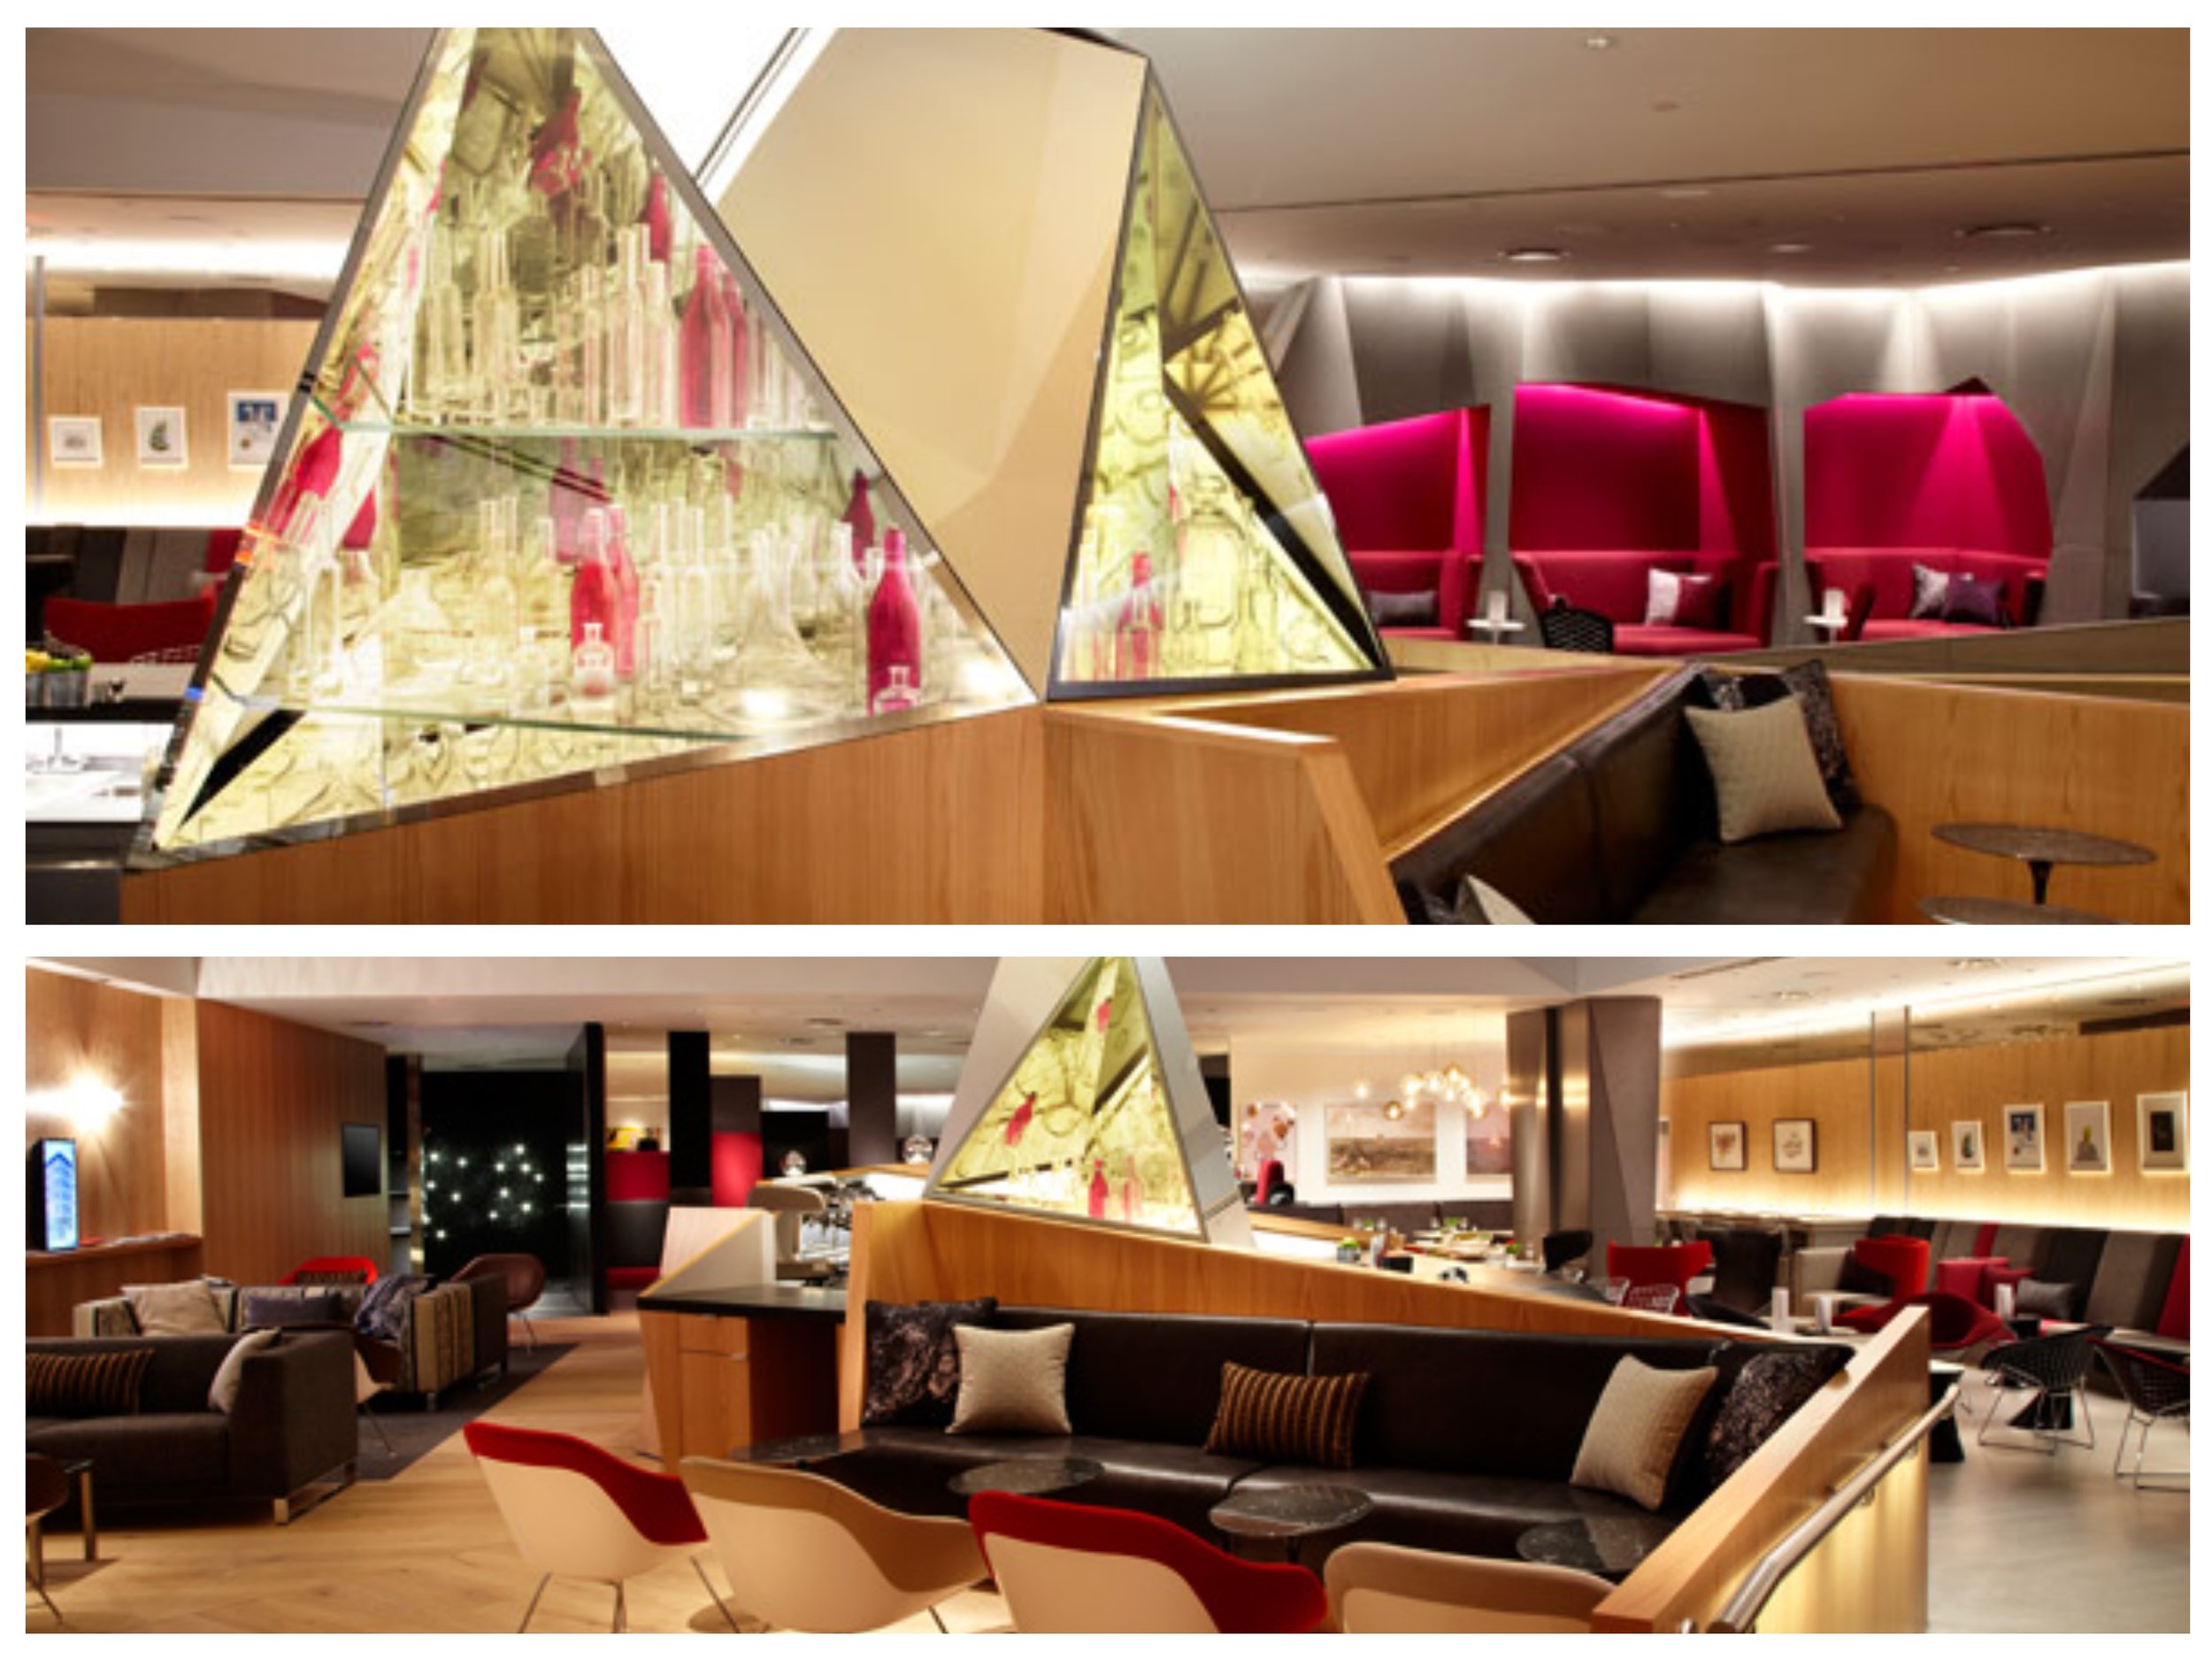 EWR VIRGIN AIRLINES CLUBHOUSE 